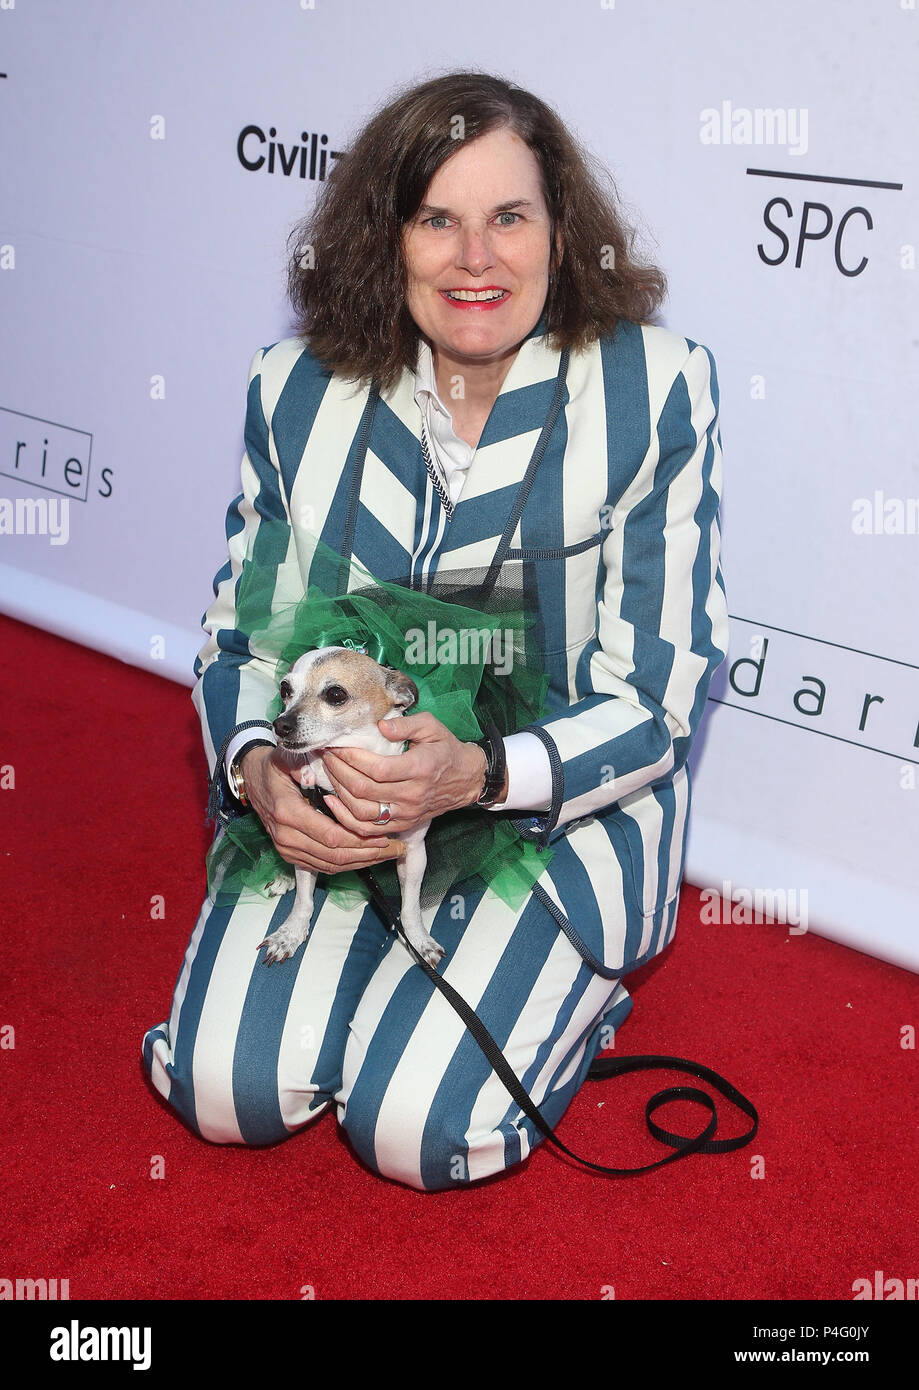 Hollywood, California, USA. 19th June, 2018. 19 June 2018 - Hollywood, California - Paula Poundstone. ''Boundaries'' Los Angeles Premiere held at the Egyptian Theatre. Photo Credit: F. Sadou/AdMedia Credit: F. Sadou/AdMedia/ZUMA Wire/Alamy Live News Stock Photo